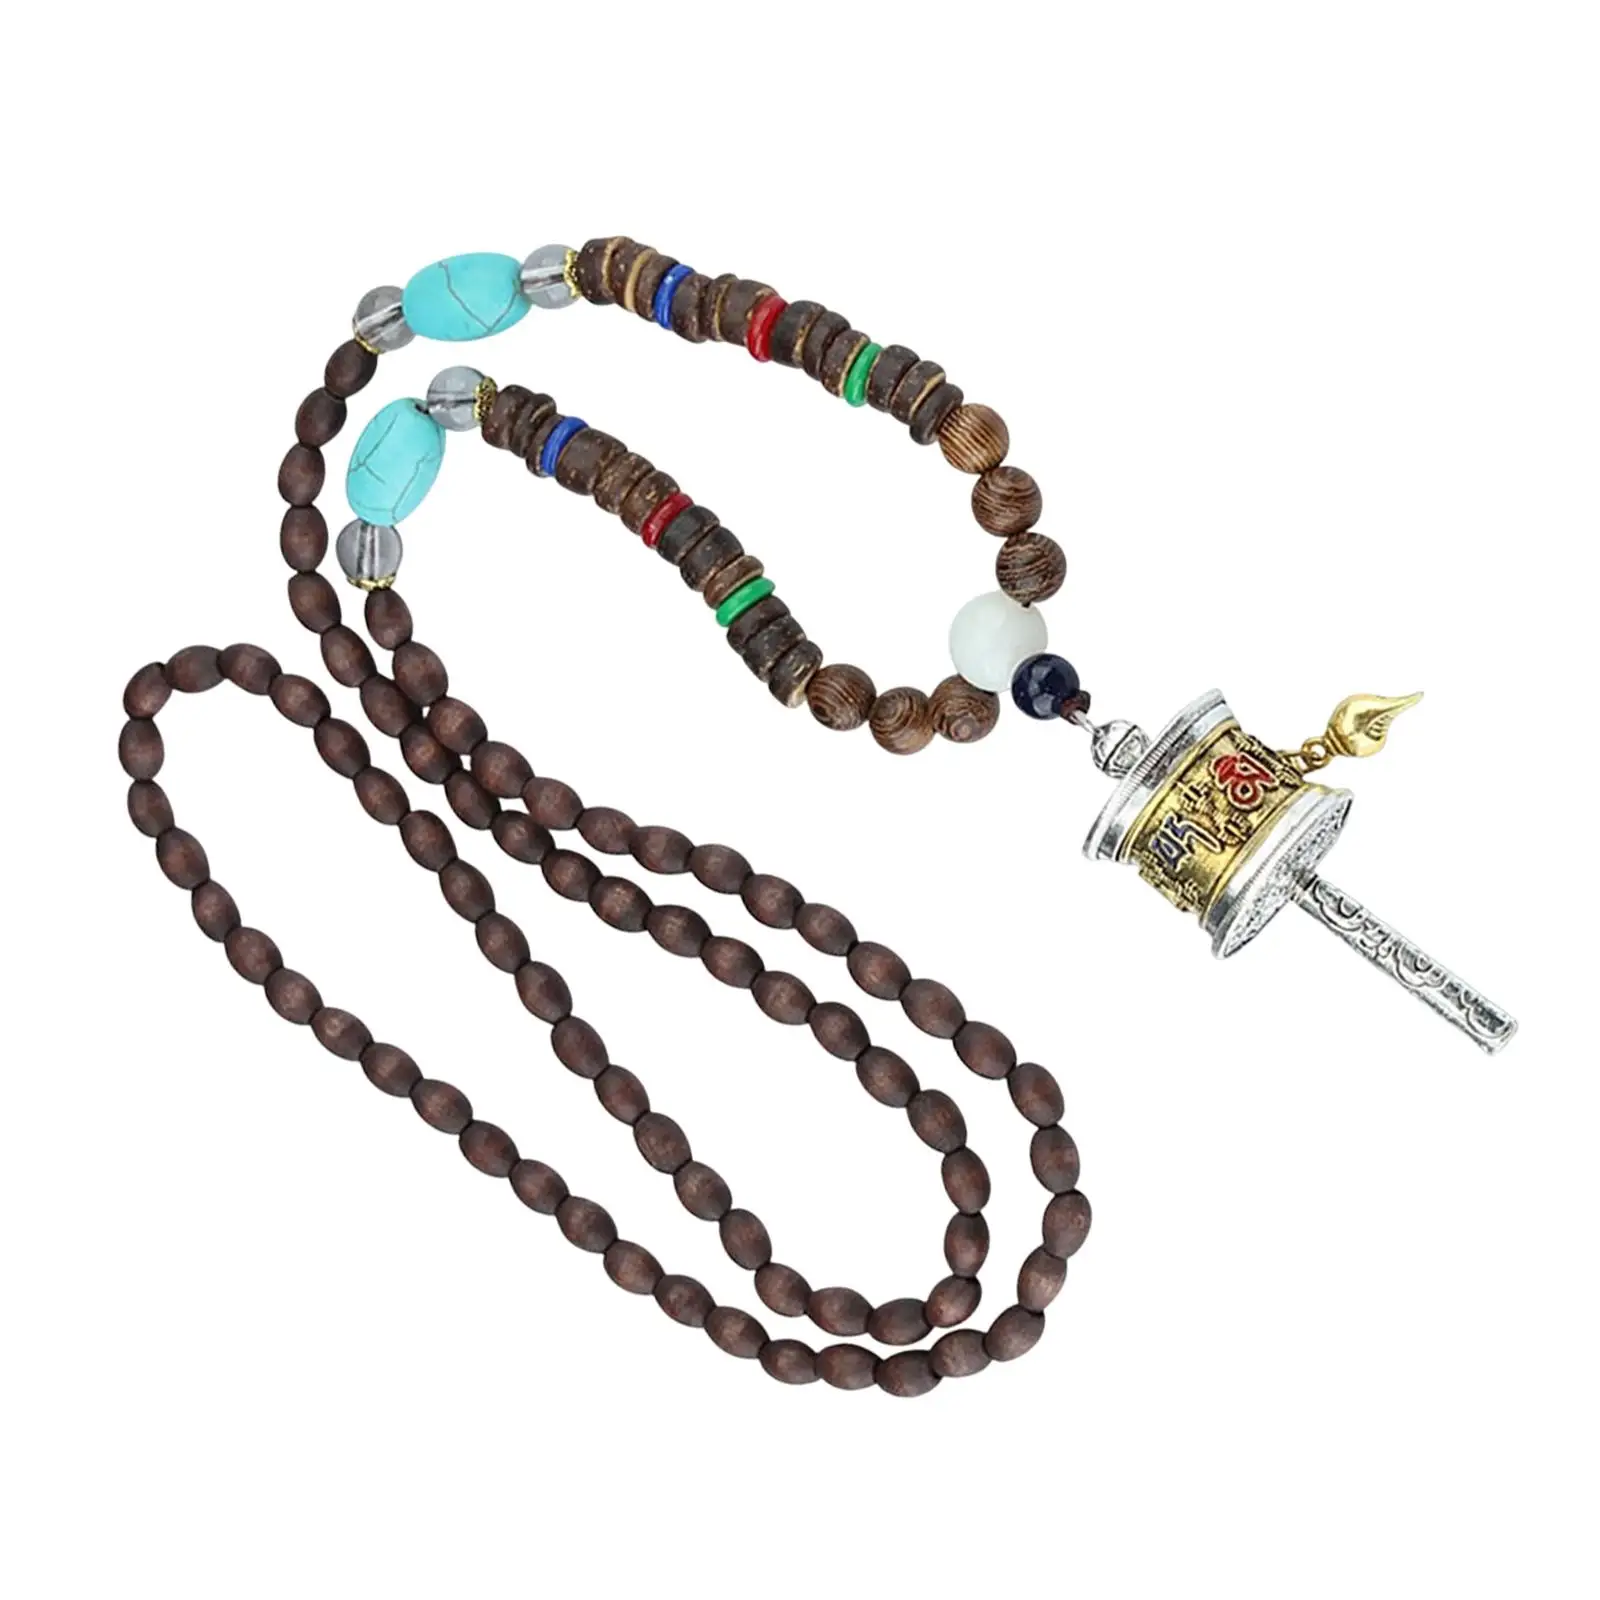 Tibetan Buddhist Long Pendant Necklace Prayer Mantra Wheel Charm Chains Jewelry Antique Wood Beads for Women Valentines Gift